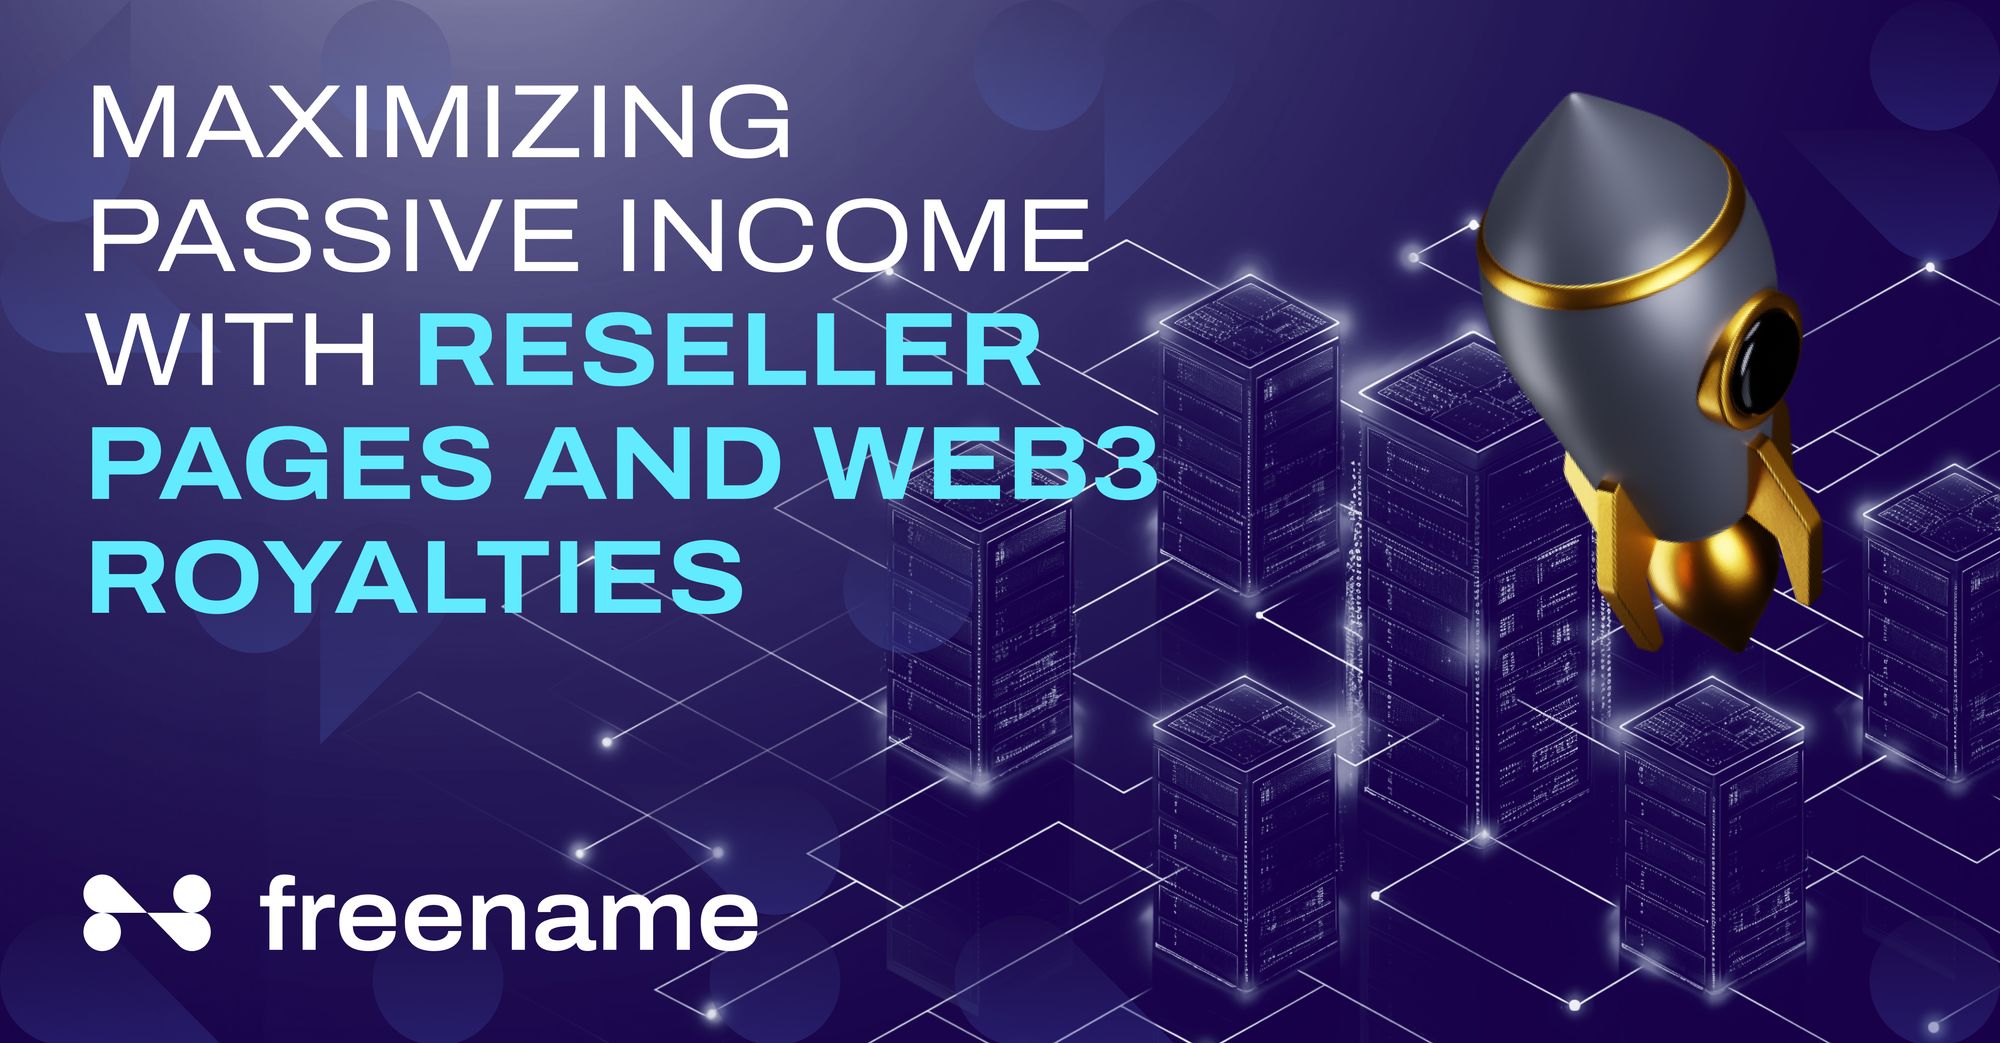 Maximizing Passive Income with Reseller Pages and Web3 Royalties